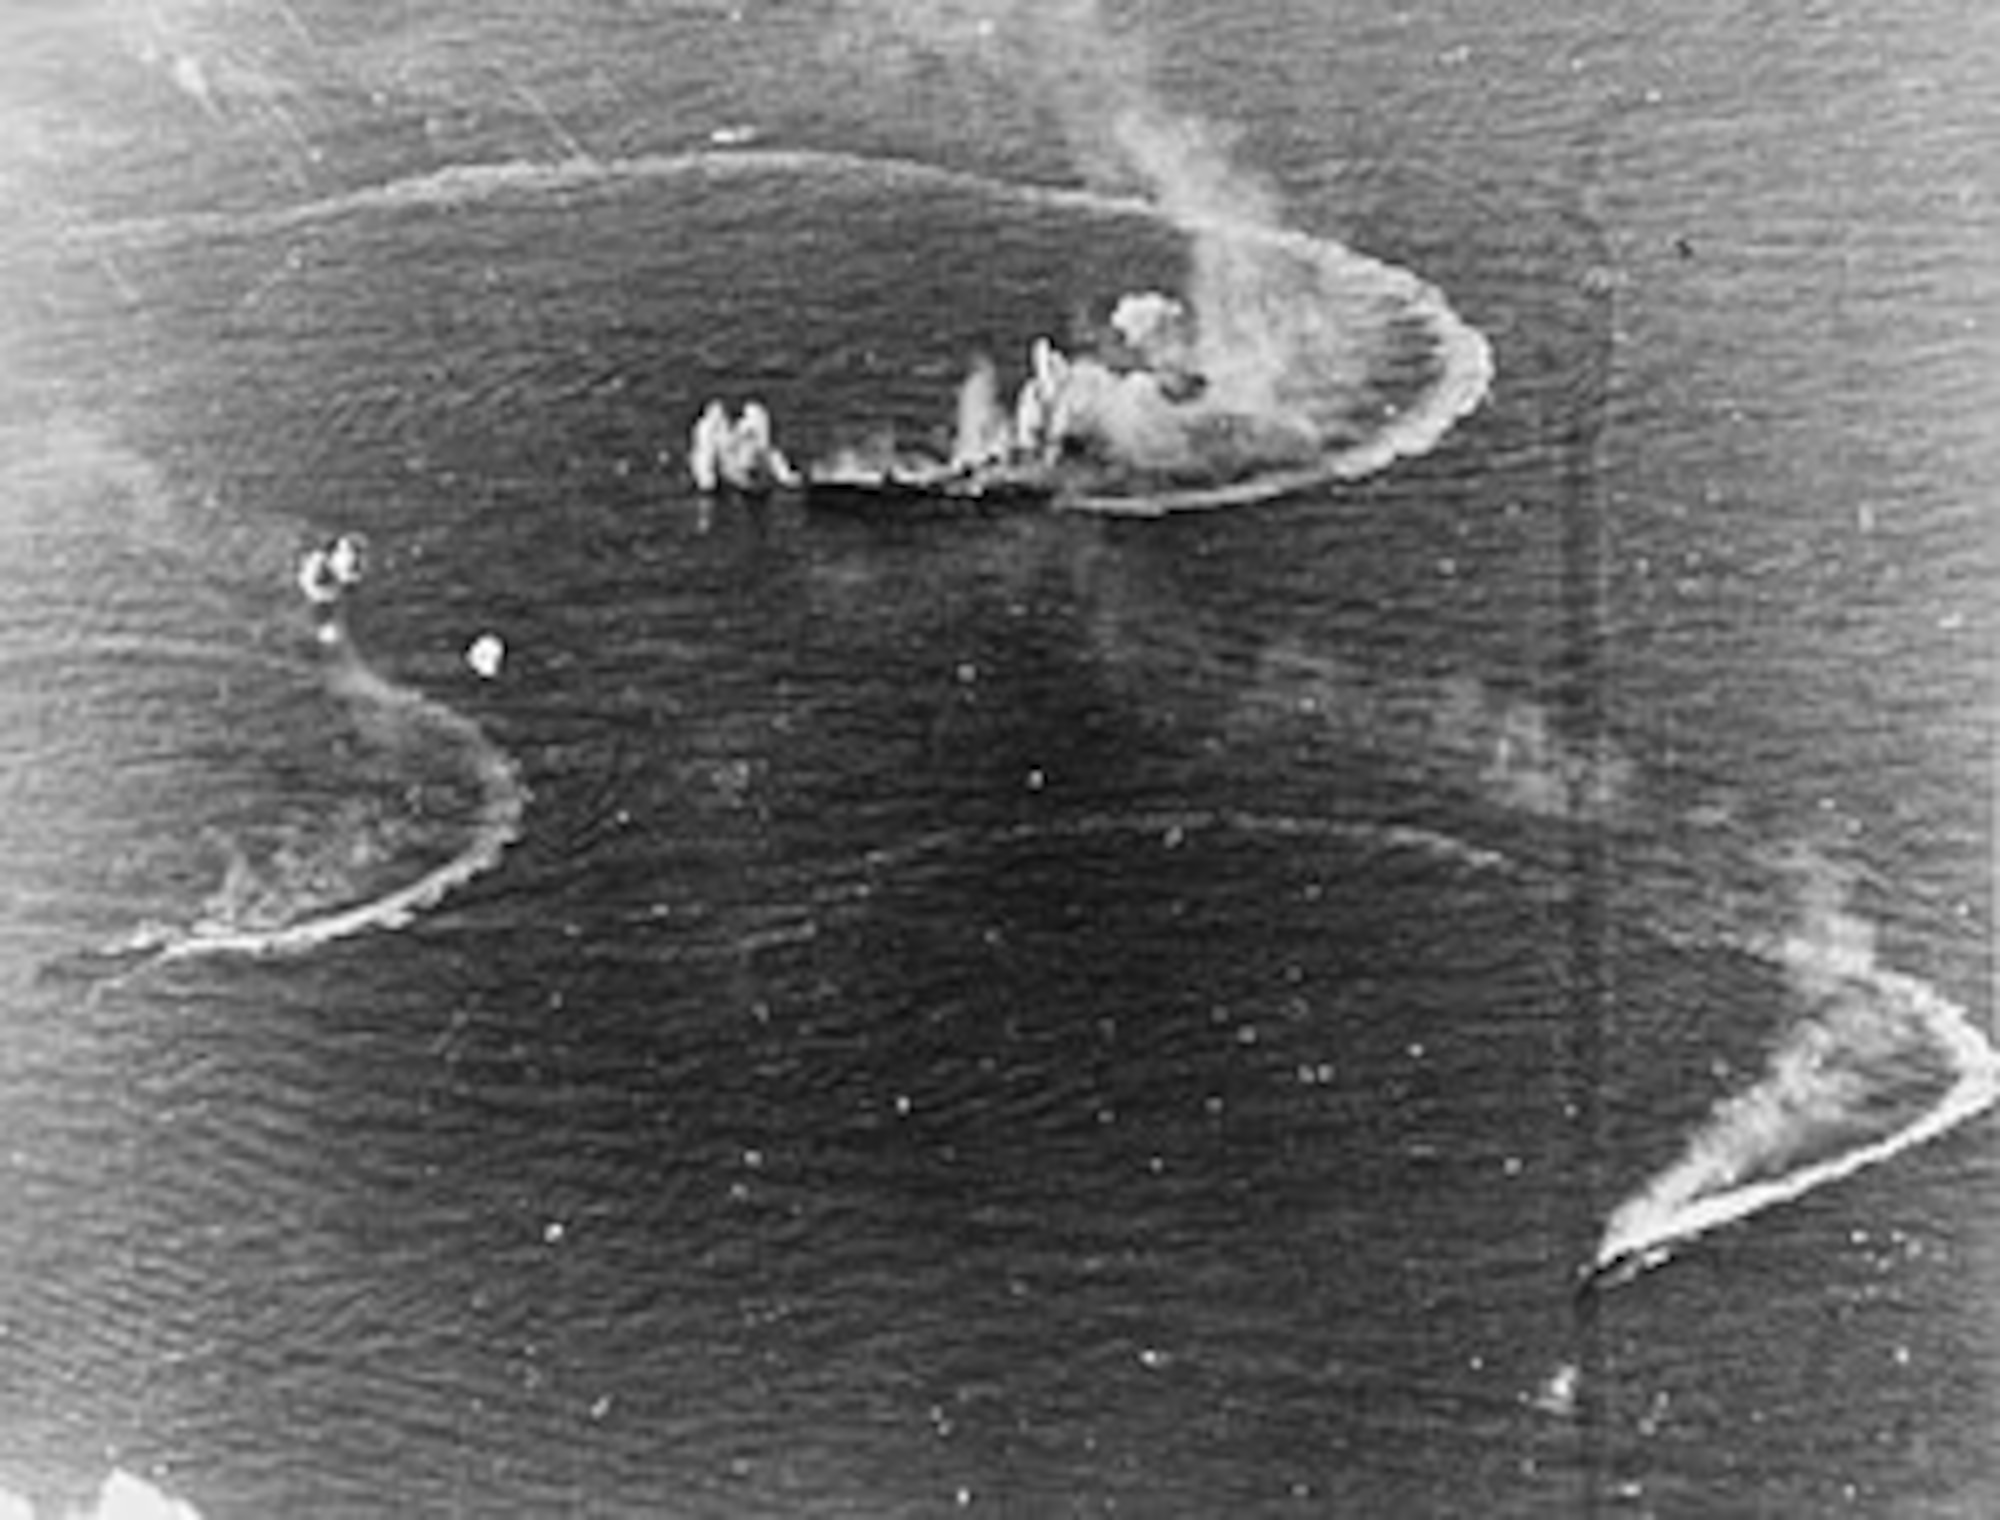 The Japanese carrier Zuikaku (center), which took part in the Japanese attack on Pearl Harbor, Dec. 7, 1941, and two destroyers under attack by Navy carrier aircraft, June 20, 1944. American aircraft sank her in the battle of Cape Engano on Oct. 25, 1944, during the battle of Leyte Gulf.